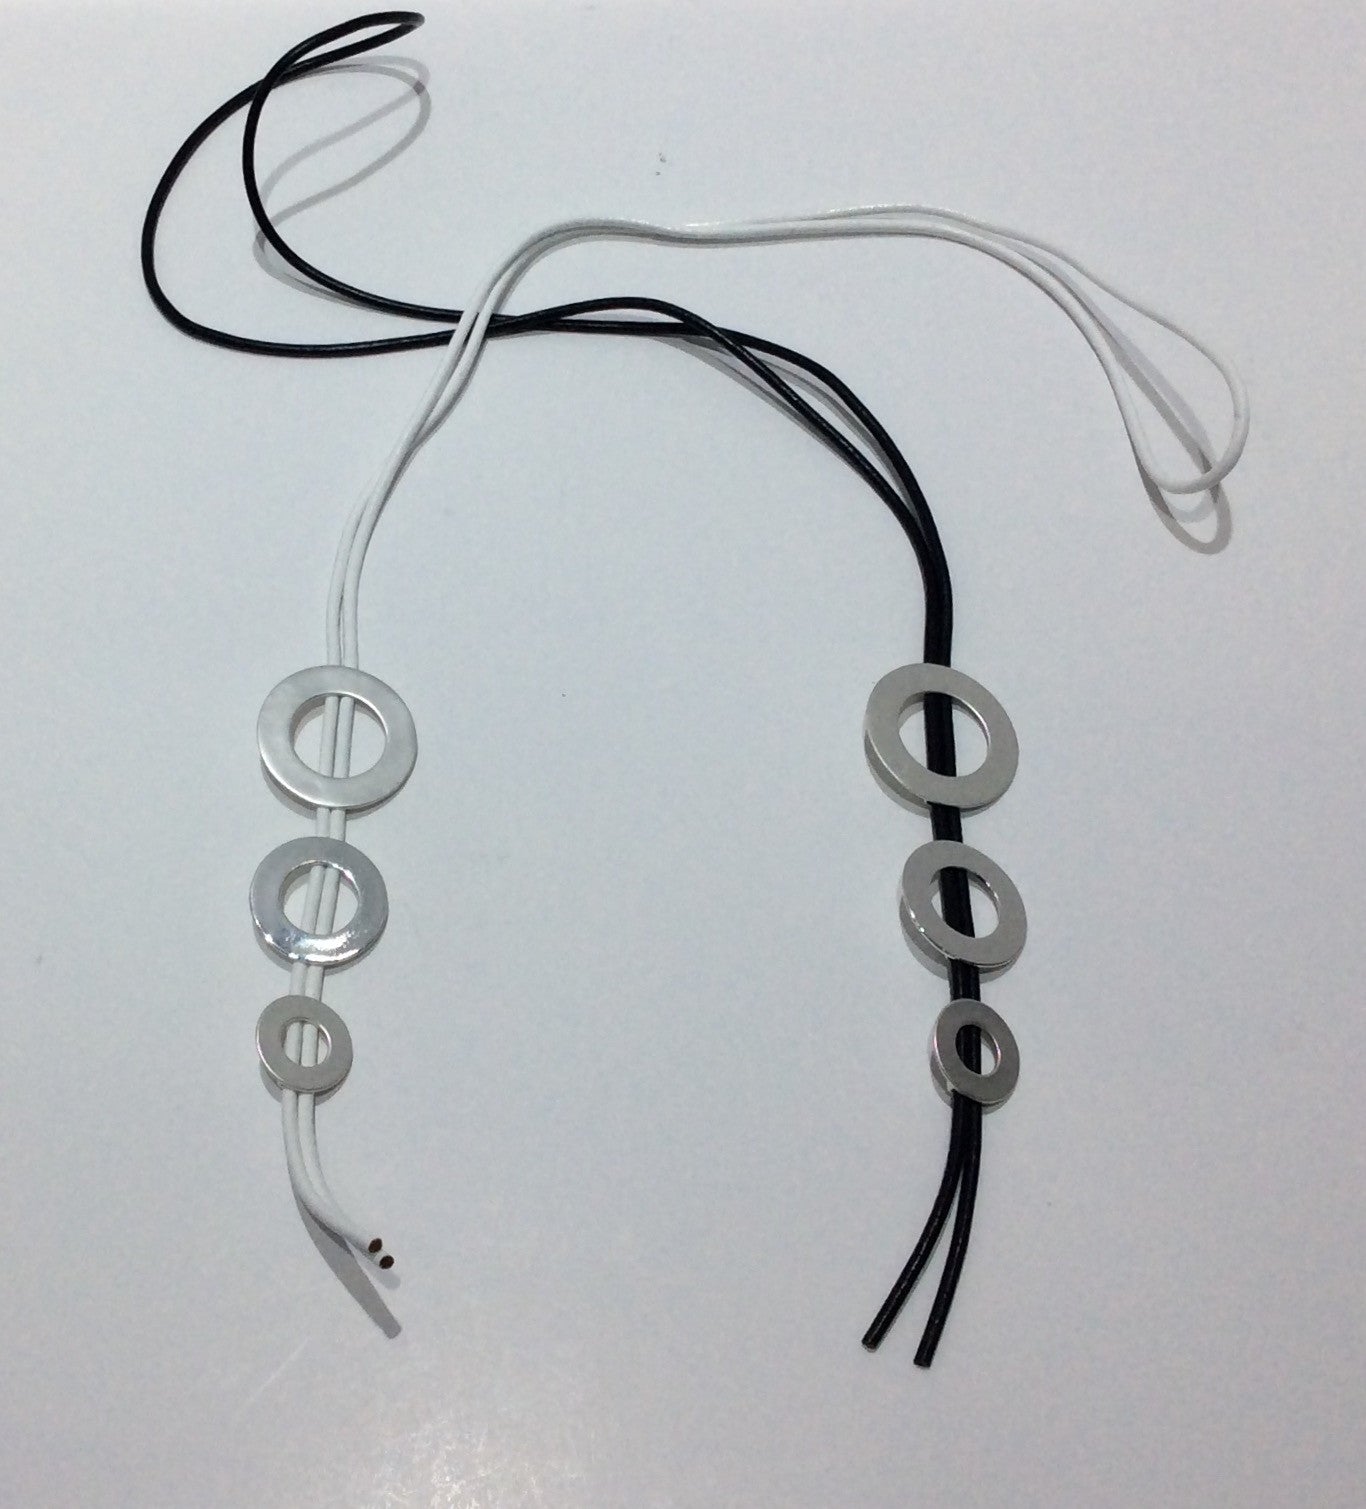 Necklace-Long cord bolero style with 3 descending in size silver metal disc beads